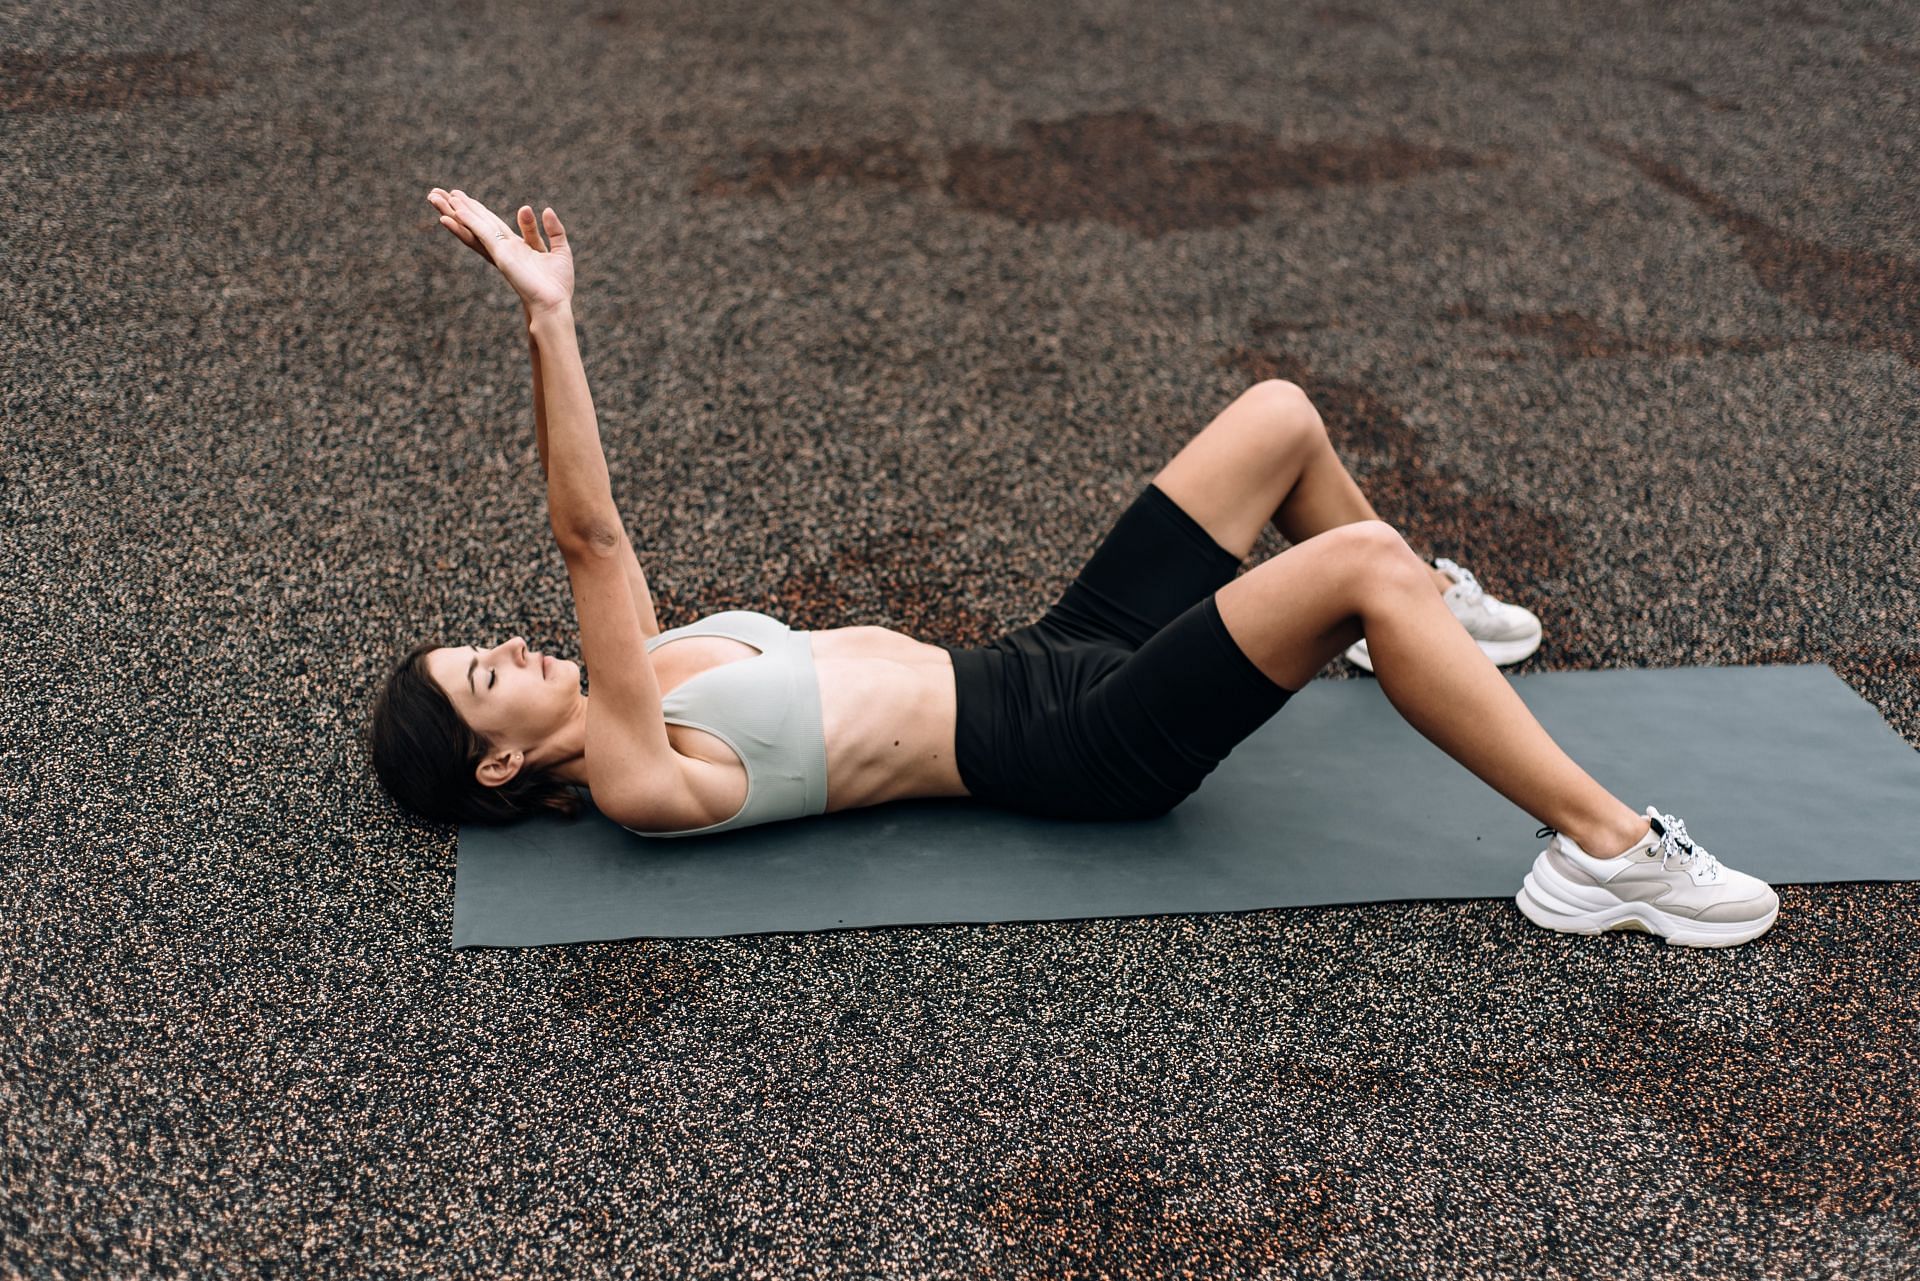 Your body requires some form of warm-up exercise before you begin your workout. (Image via Pexels/ Roman Odinstov)